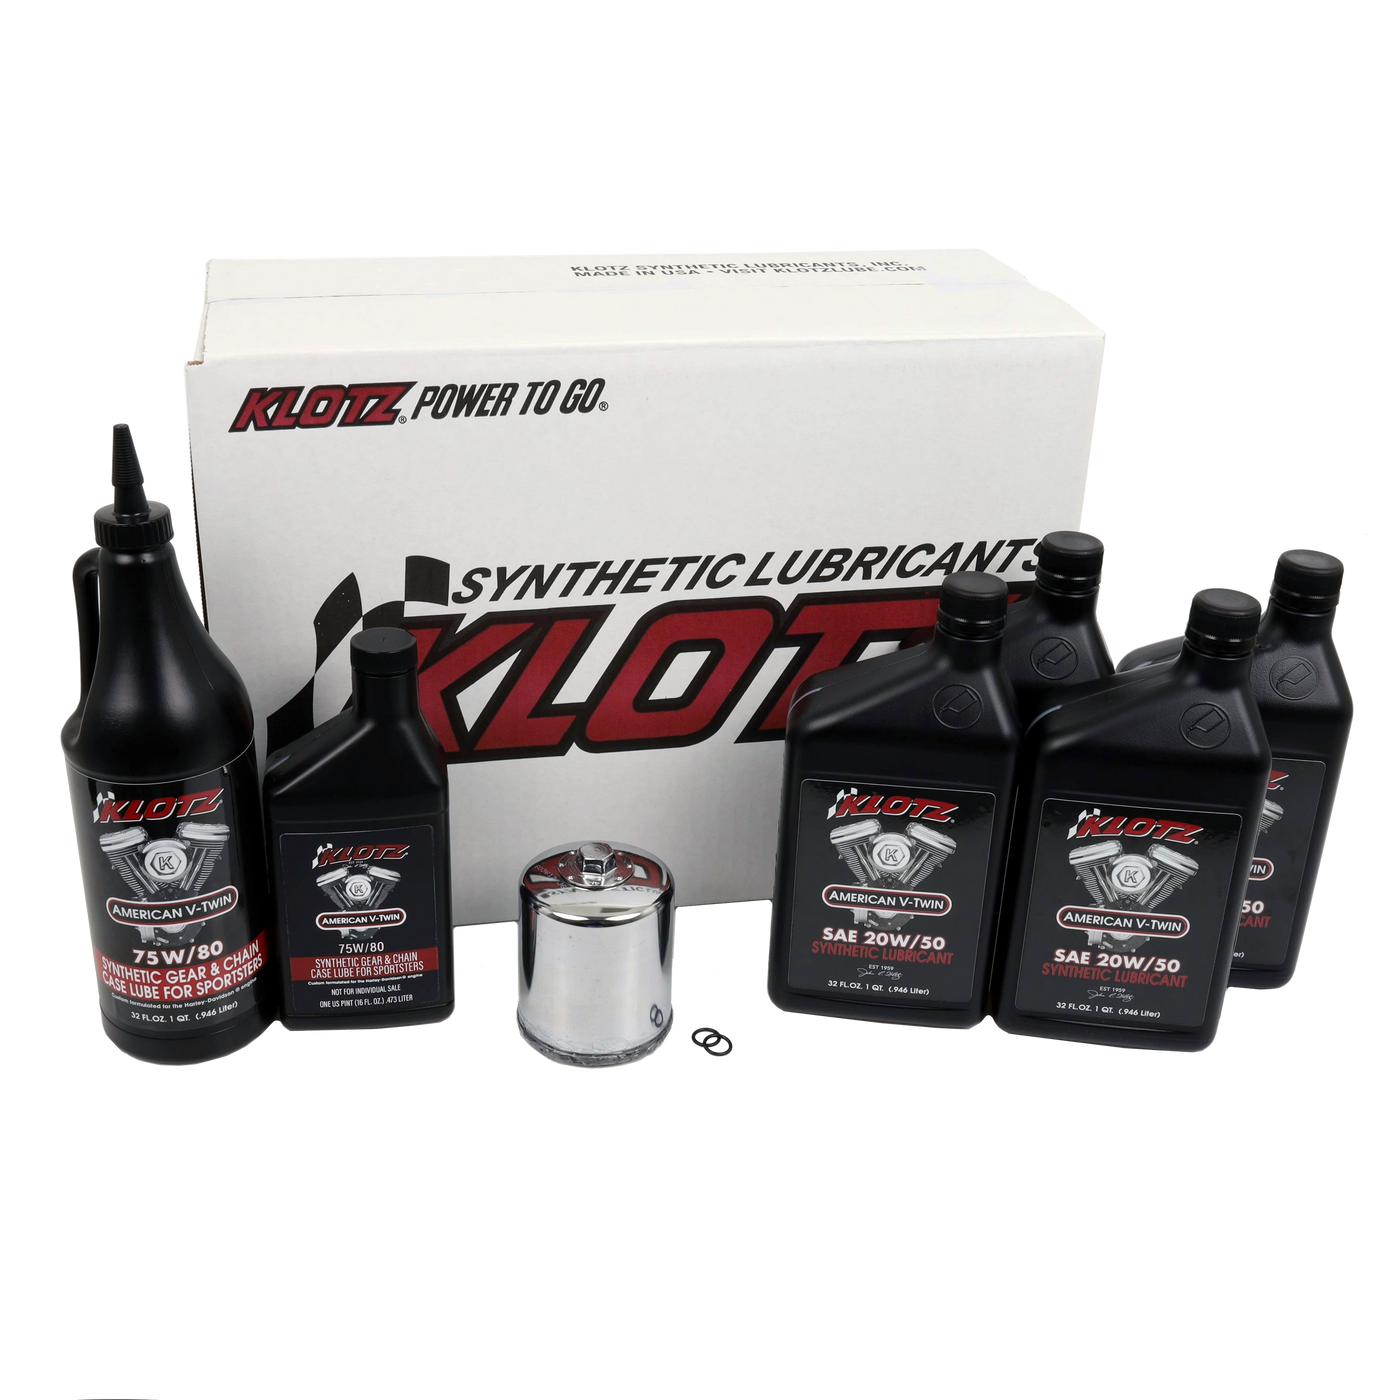 The Klotz premium complete oil change kit for Harley-Davidson Sportster motorcycles (Evolution) is perfect. It includes high-quality synthetic lubricants for optimal performance and protection.